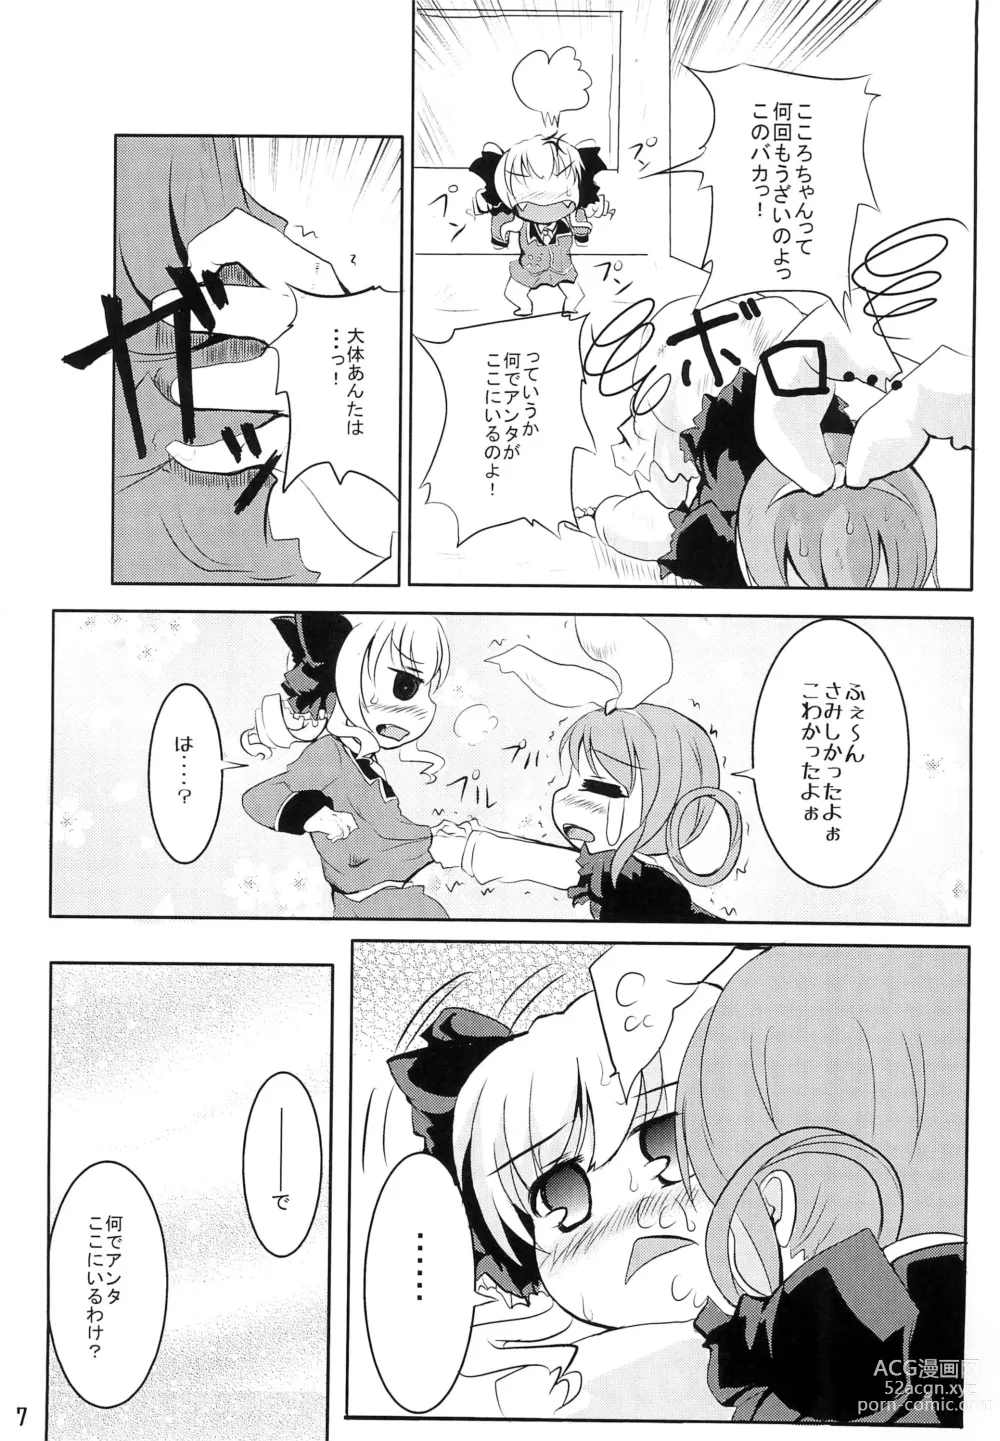 Page 7 of doujinshi Milky Syrup